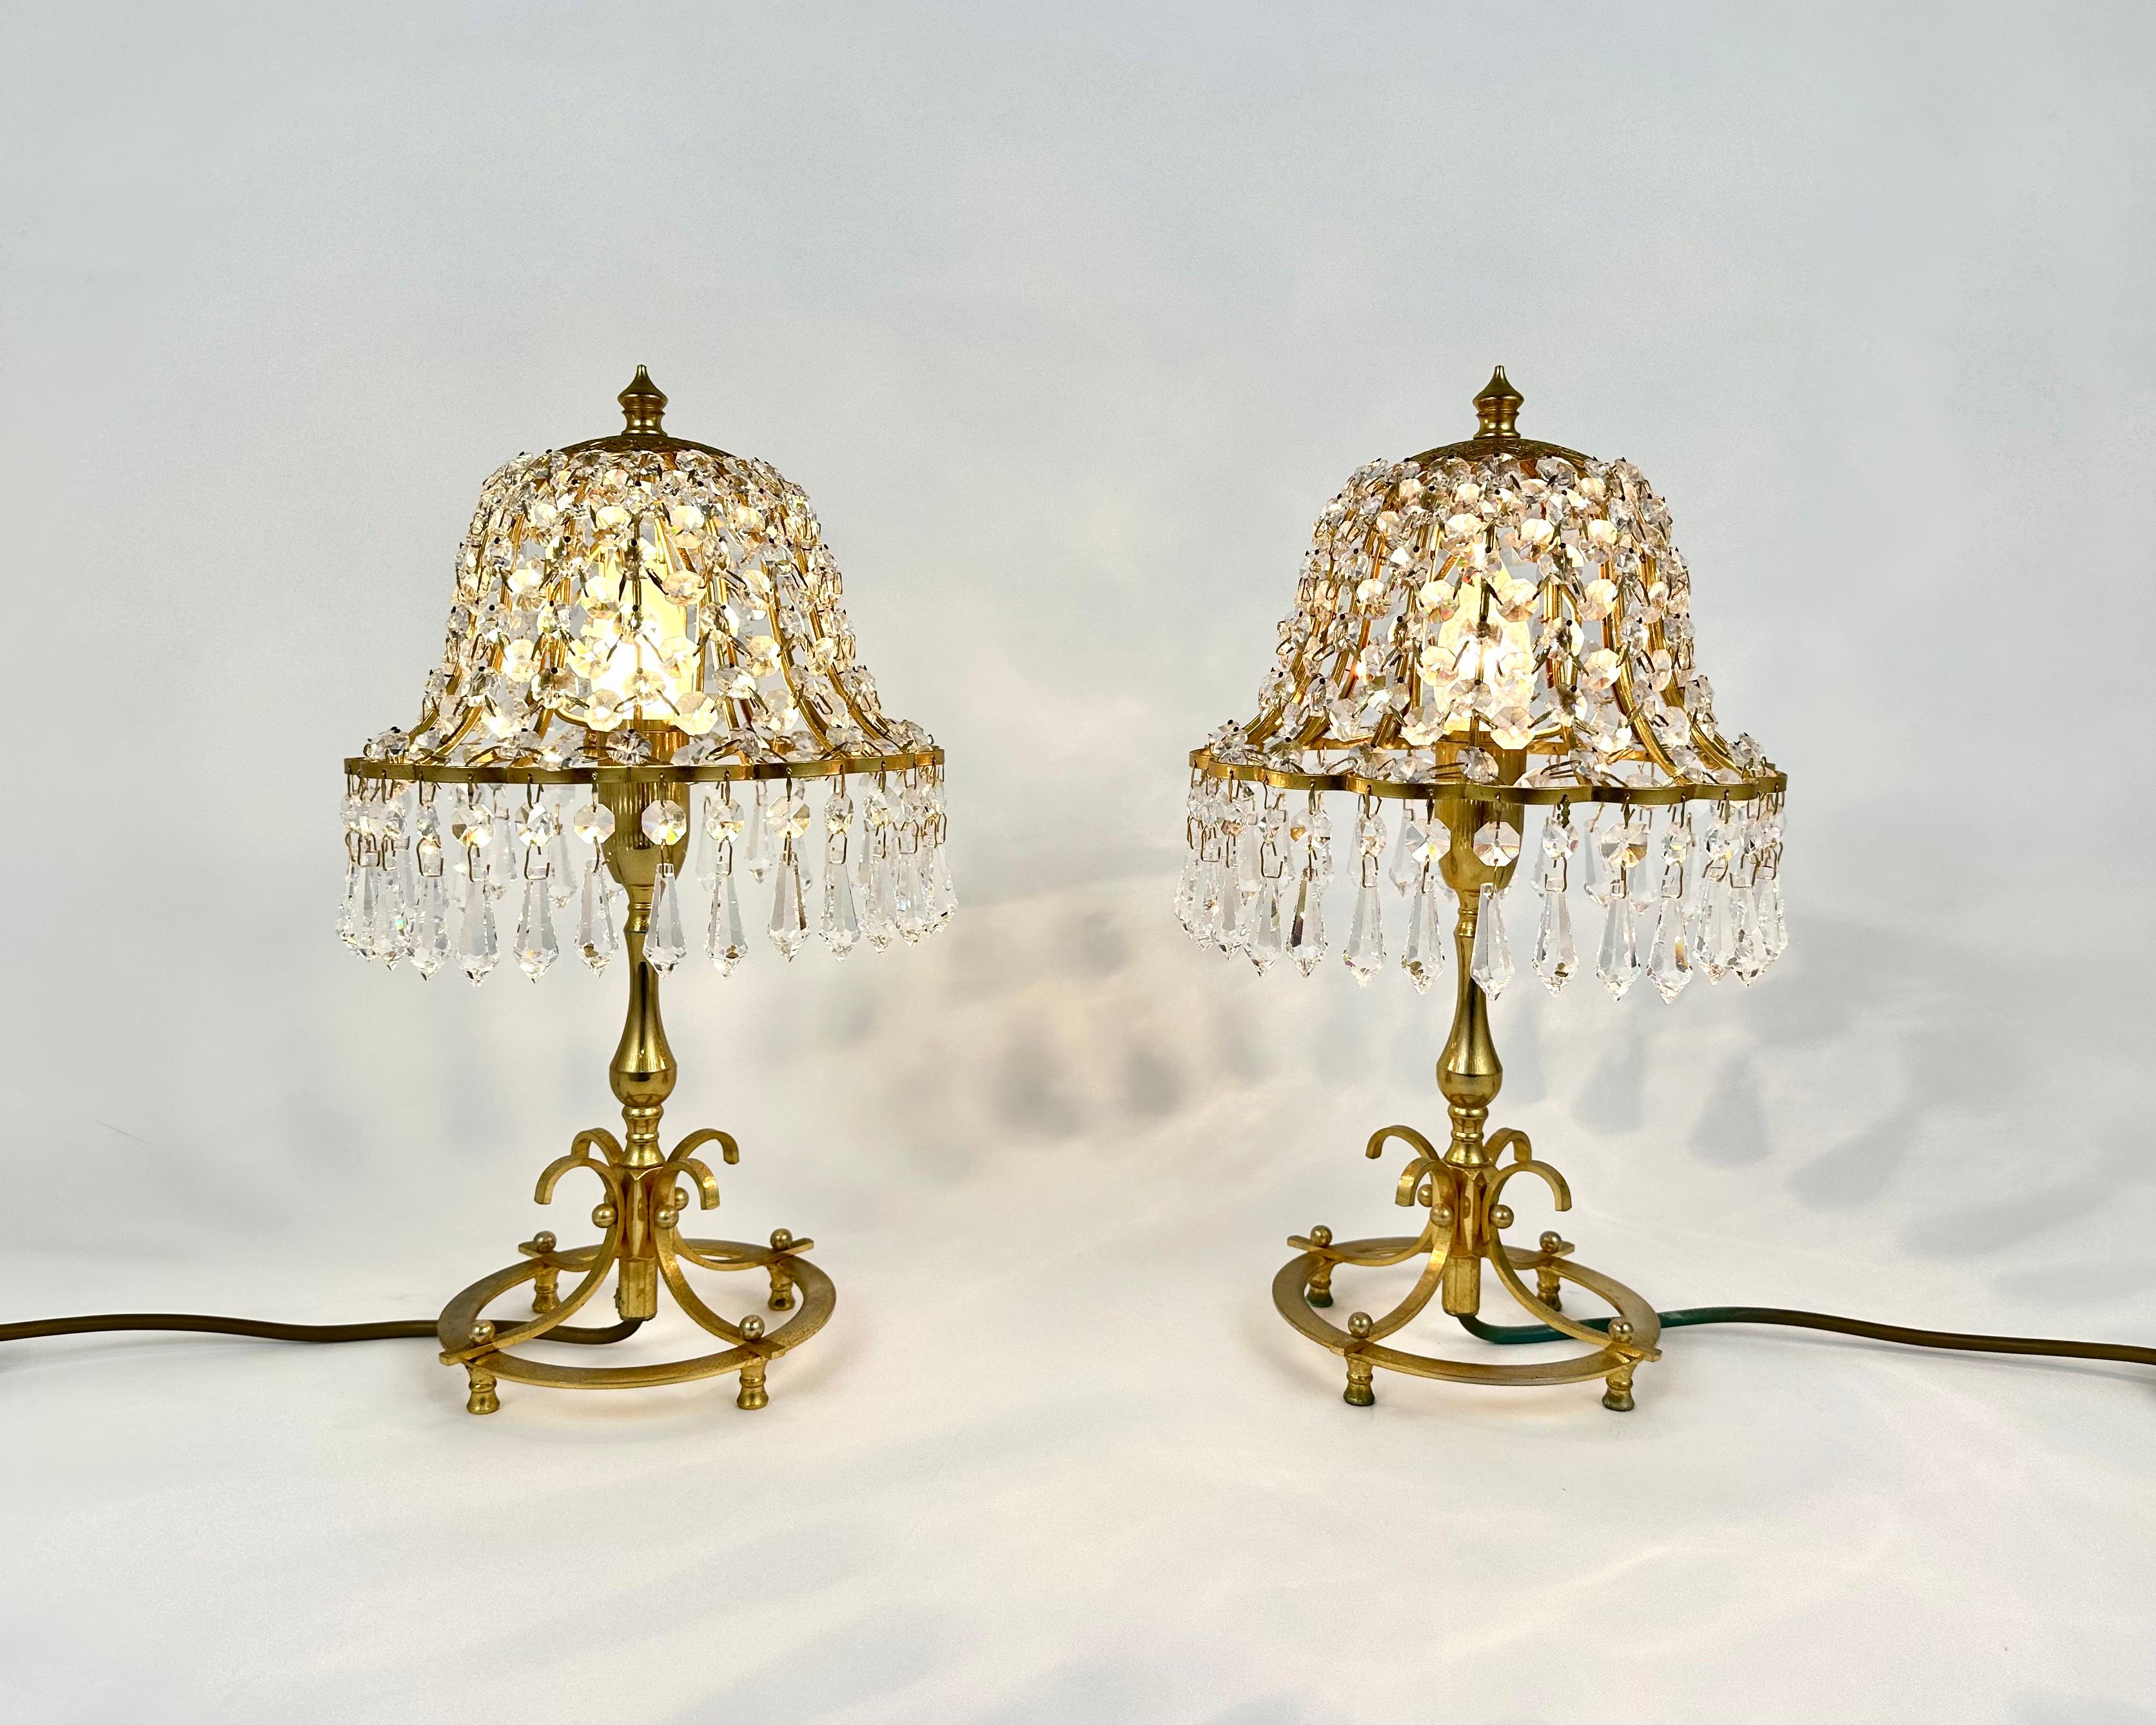 Unique vintage table lamps from France, 1960s.

Beautiful paired table lamps, which have an impressive design off and even when the condition is switched on, a very nice soft light throws through the lead crystals.

It has a very nice 30% lead